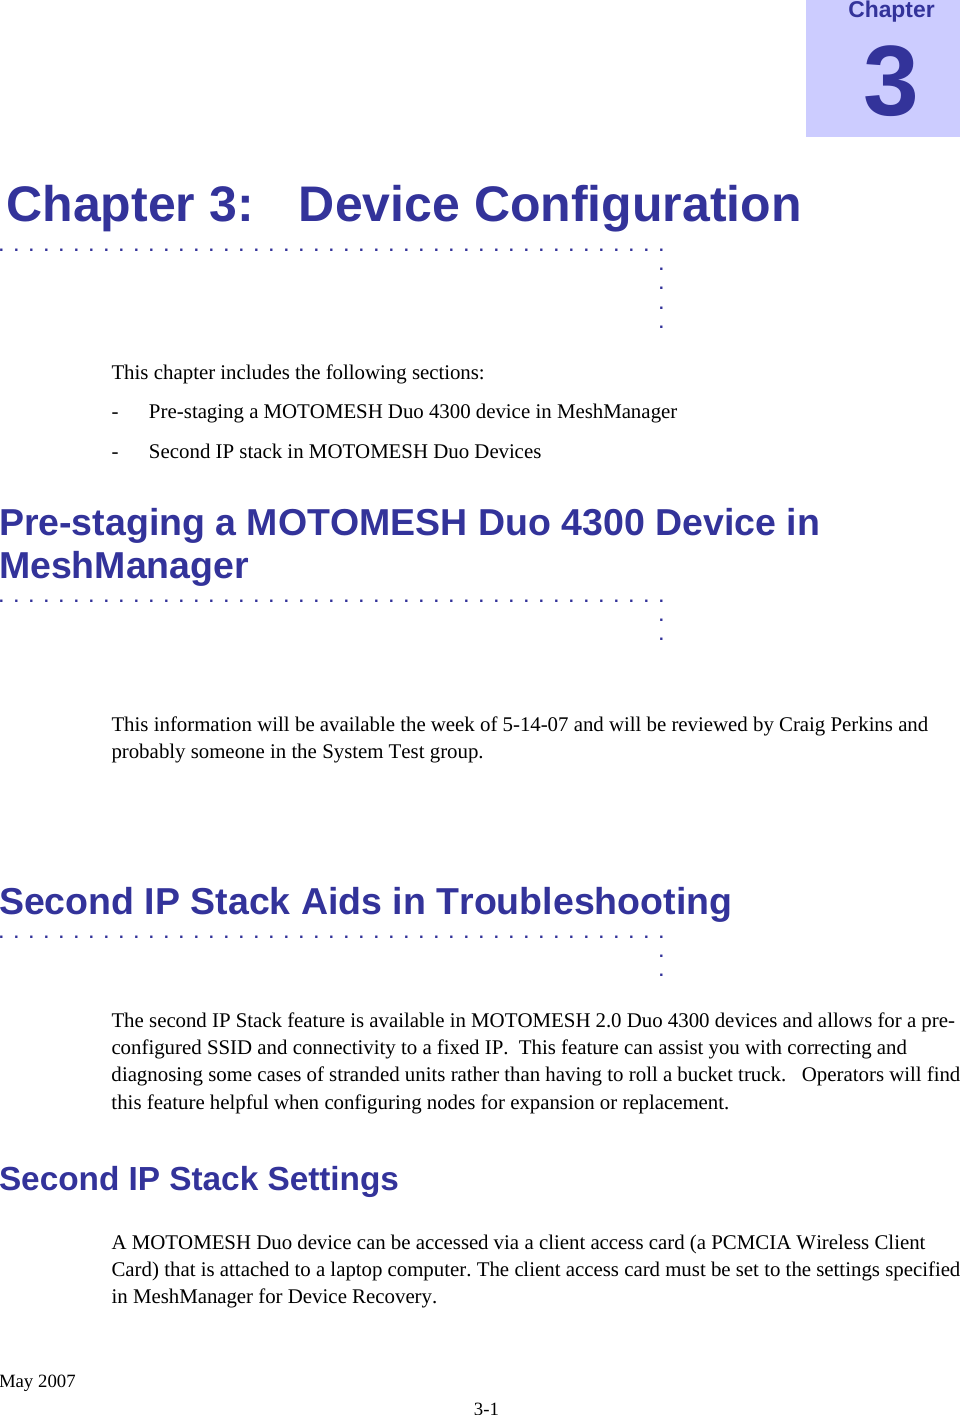    May 2007 3-1 Chapter 3 Chapter 3:  Device Configuration .............................................  .  .  .  . This chapter includes the following sections: - Pre-staging a MOTOMESH Duo 4300 device in MeshManager - Second IP stack in MOTOMESH Duo Devices Pre-staging a MOTOMESH Duo 4300 Device in MeshManager  .............................................  .  .  This information will be available the week of 5-14-07 and will be reviewed by Craig Perkins and probably someone in the System Test group.   Second IP Stack Aids in Troubleshooting .............................................  .  . The second IP Stack feature is available in MOTOMESH 2.0 Duo 4300 devices and allows for a pre-configured SSID and connectivity to a fixed IP.  This feature can assist you with correcting and diagnosing some cases of stranded units rather than having to roll a bucket truck.   Operators will find this feature helpful when configuring nodes for expansion or replacement. Second IP Stack Settings A MOTOMESH Duo device can be accessed via a client access card (a PCMCIA Wireless Client Card) that is attached to a laptop computer. The client access card must be set to the settings specified in MeshManager for Device Recovery. 